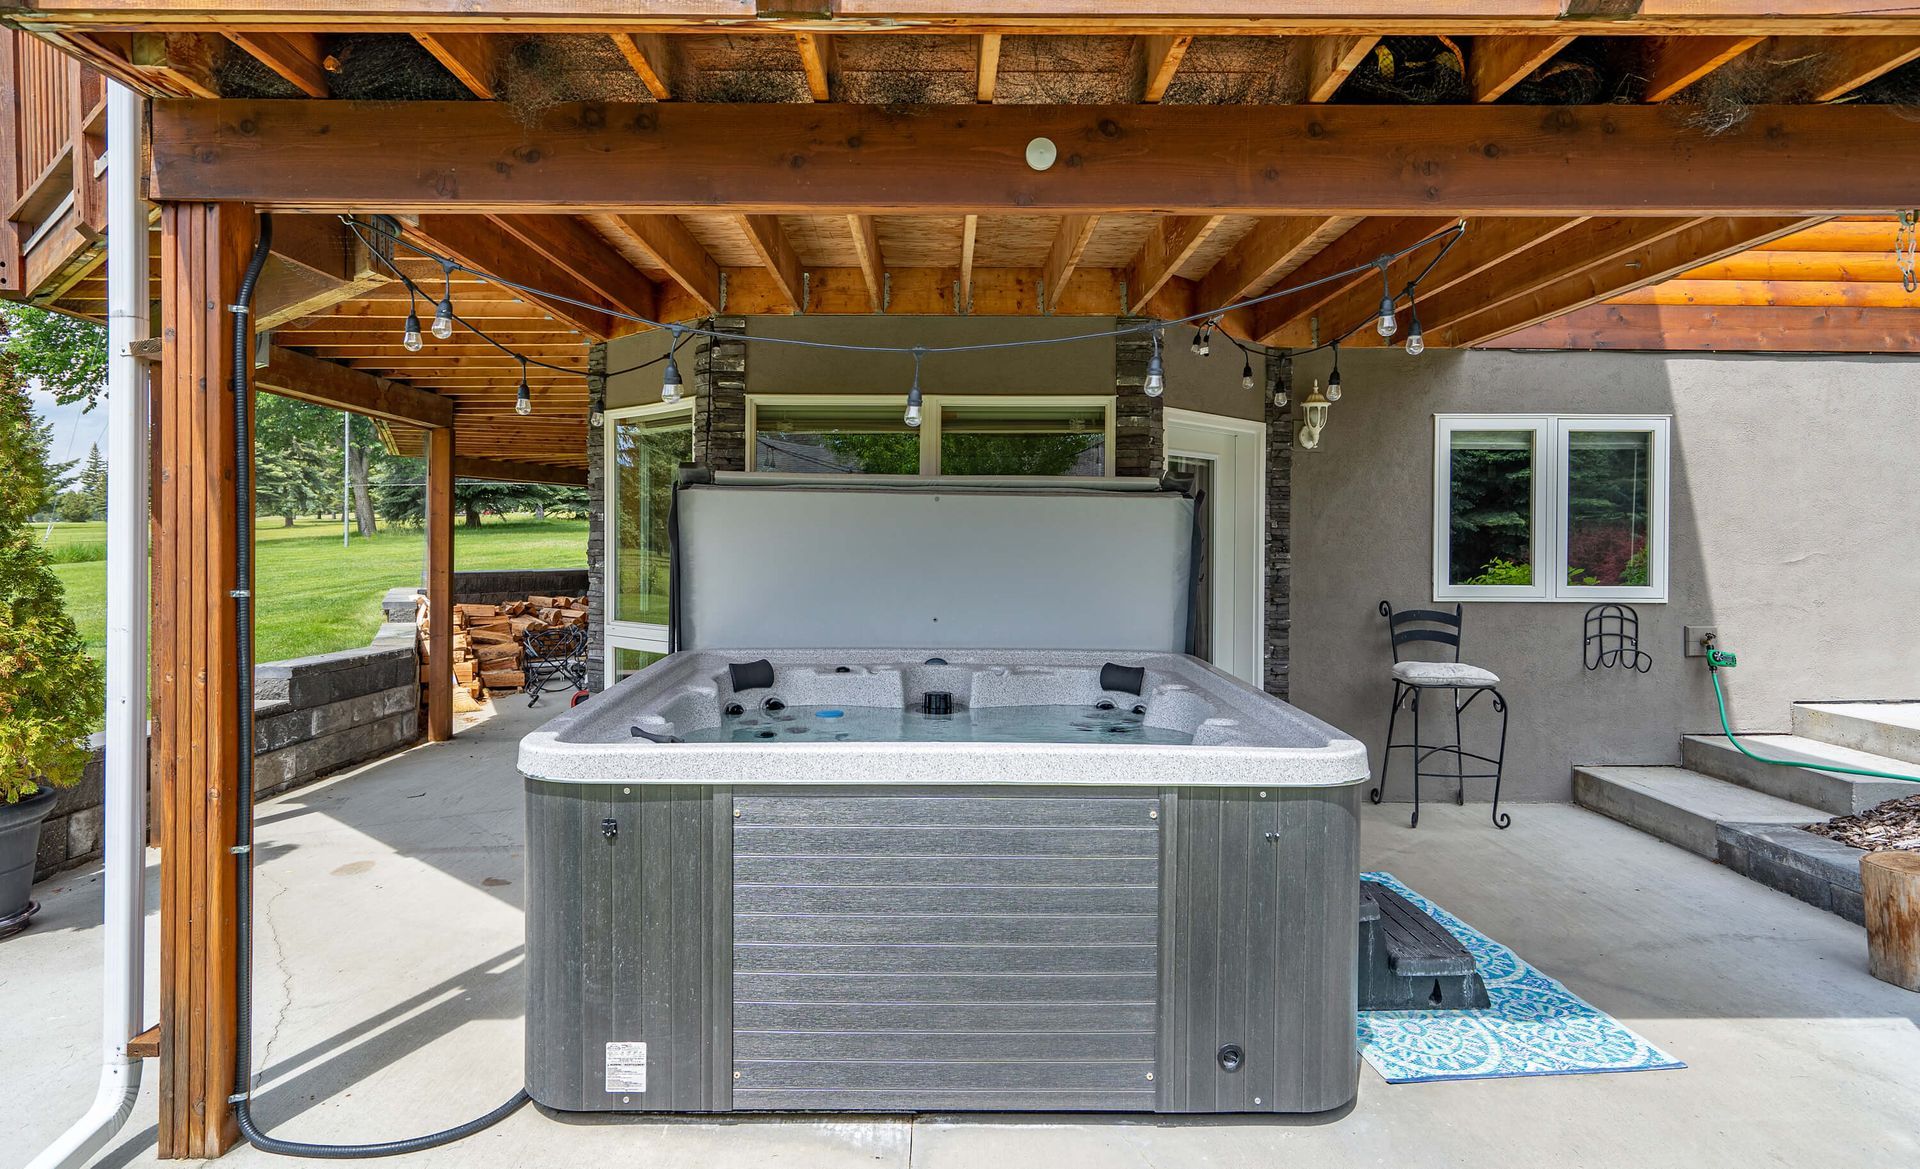 Private hot tub of  of the Fairway17, a Windermere BC Vacation Rental hosted by Aisling Baile Property Management.